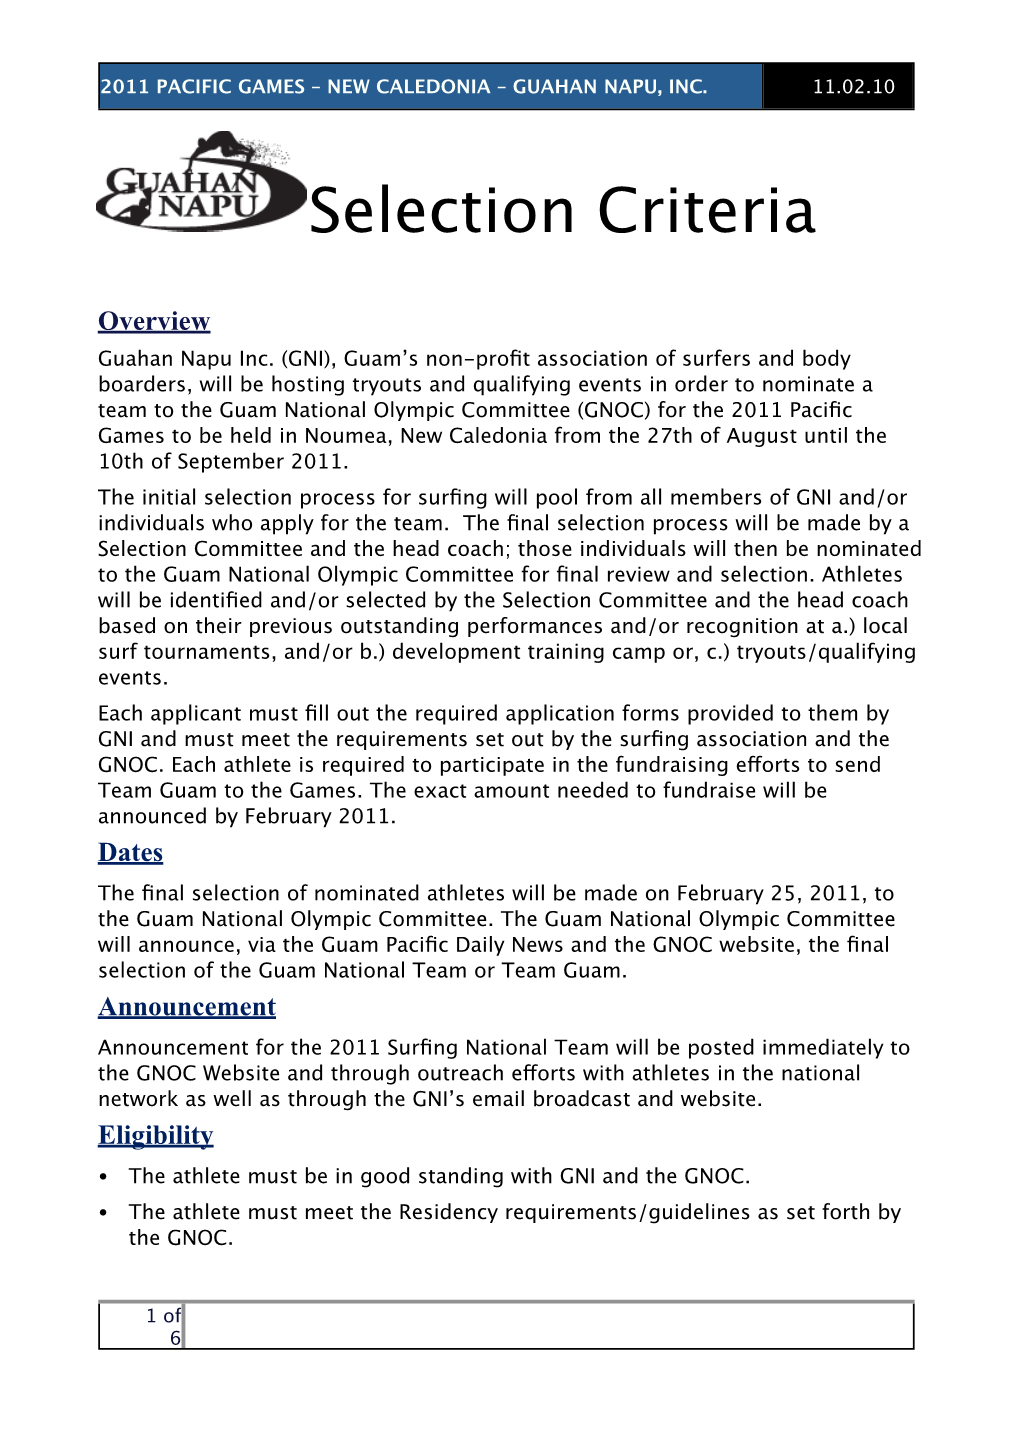 GNI (Surfing)Selection Criteria for 2011 PG